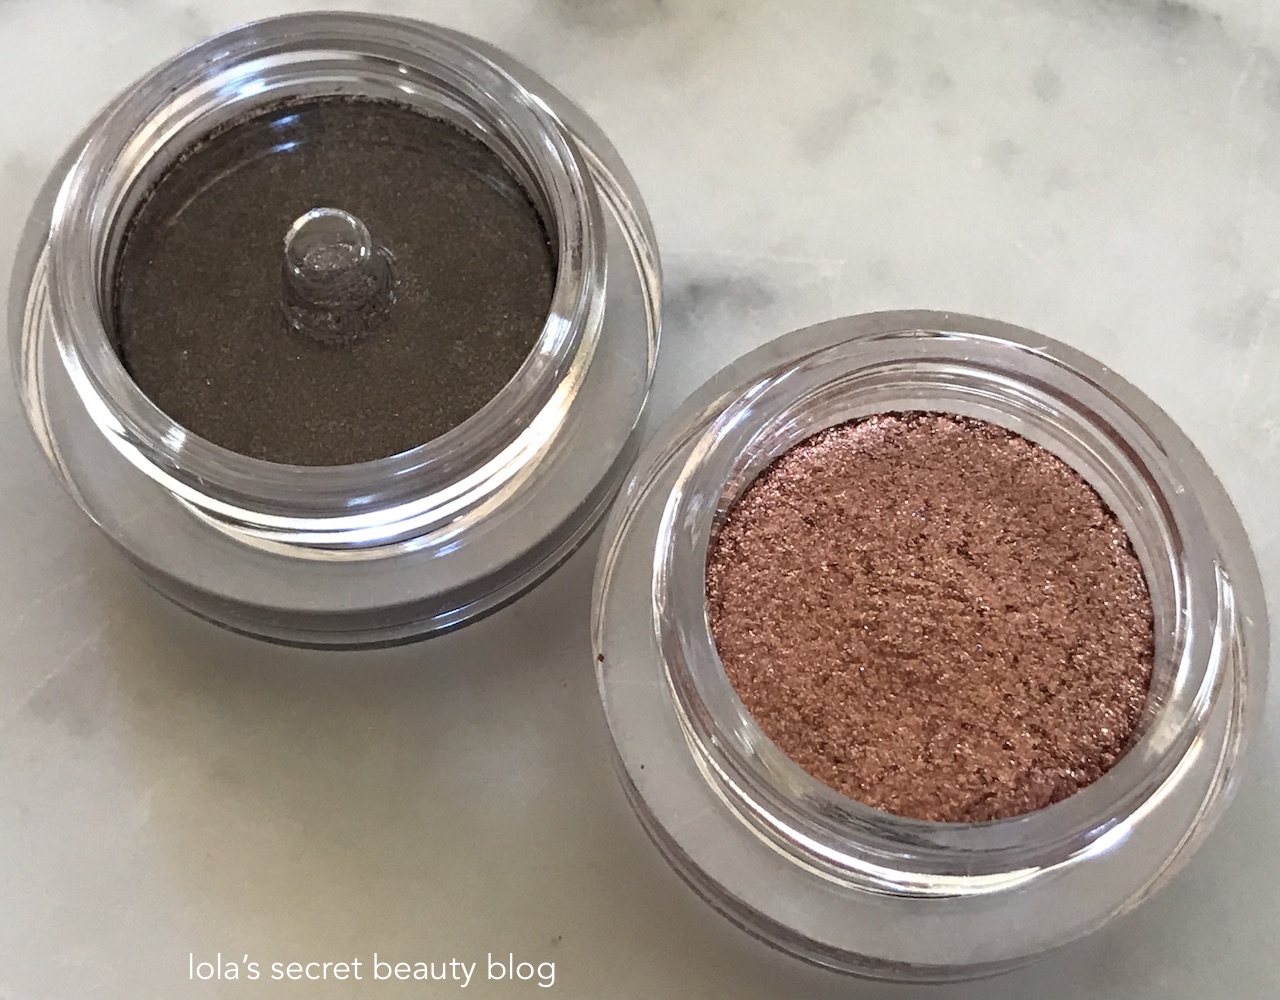 Bodyography Glitter Pigments feature one-of-a-kind eyeshadow technology. 